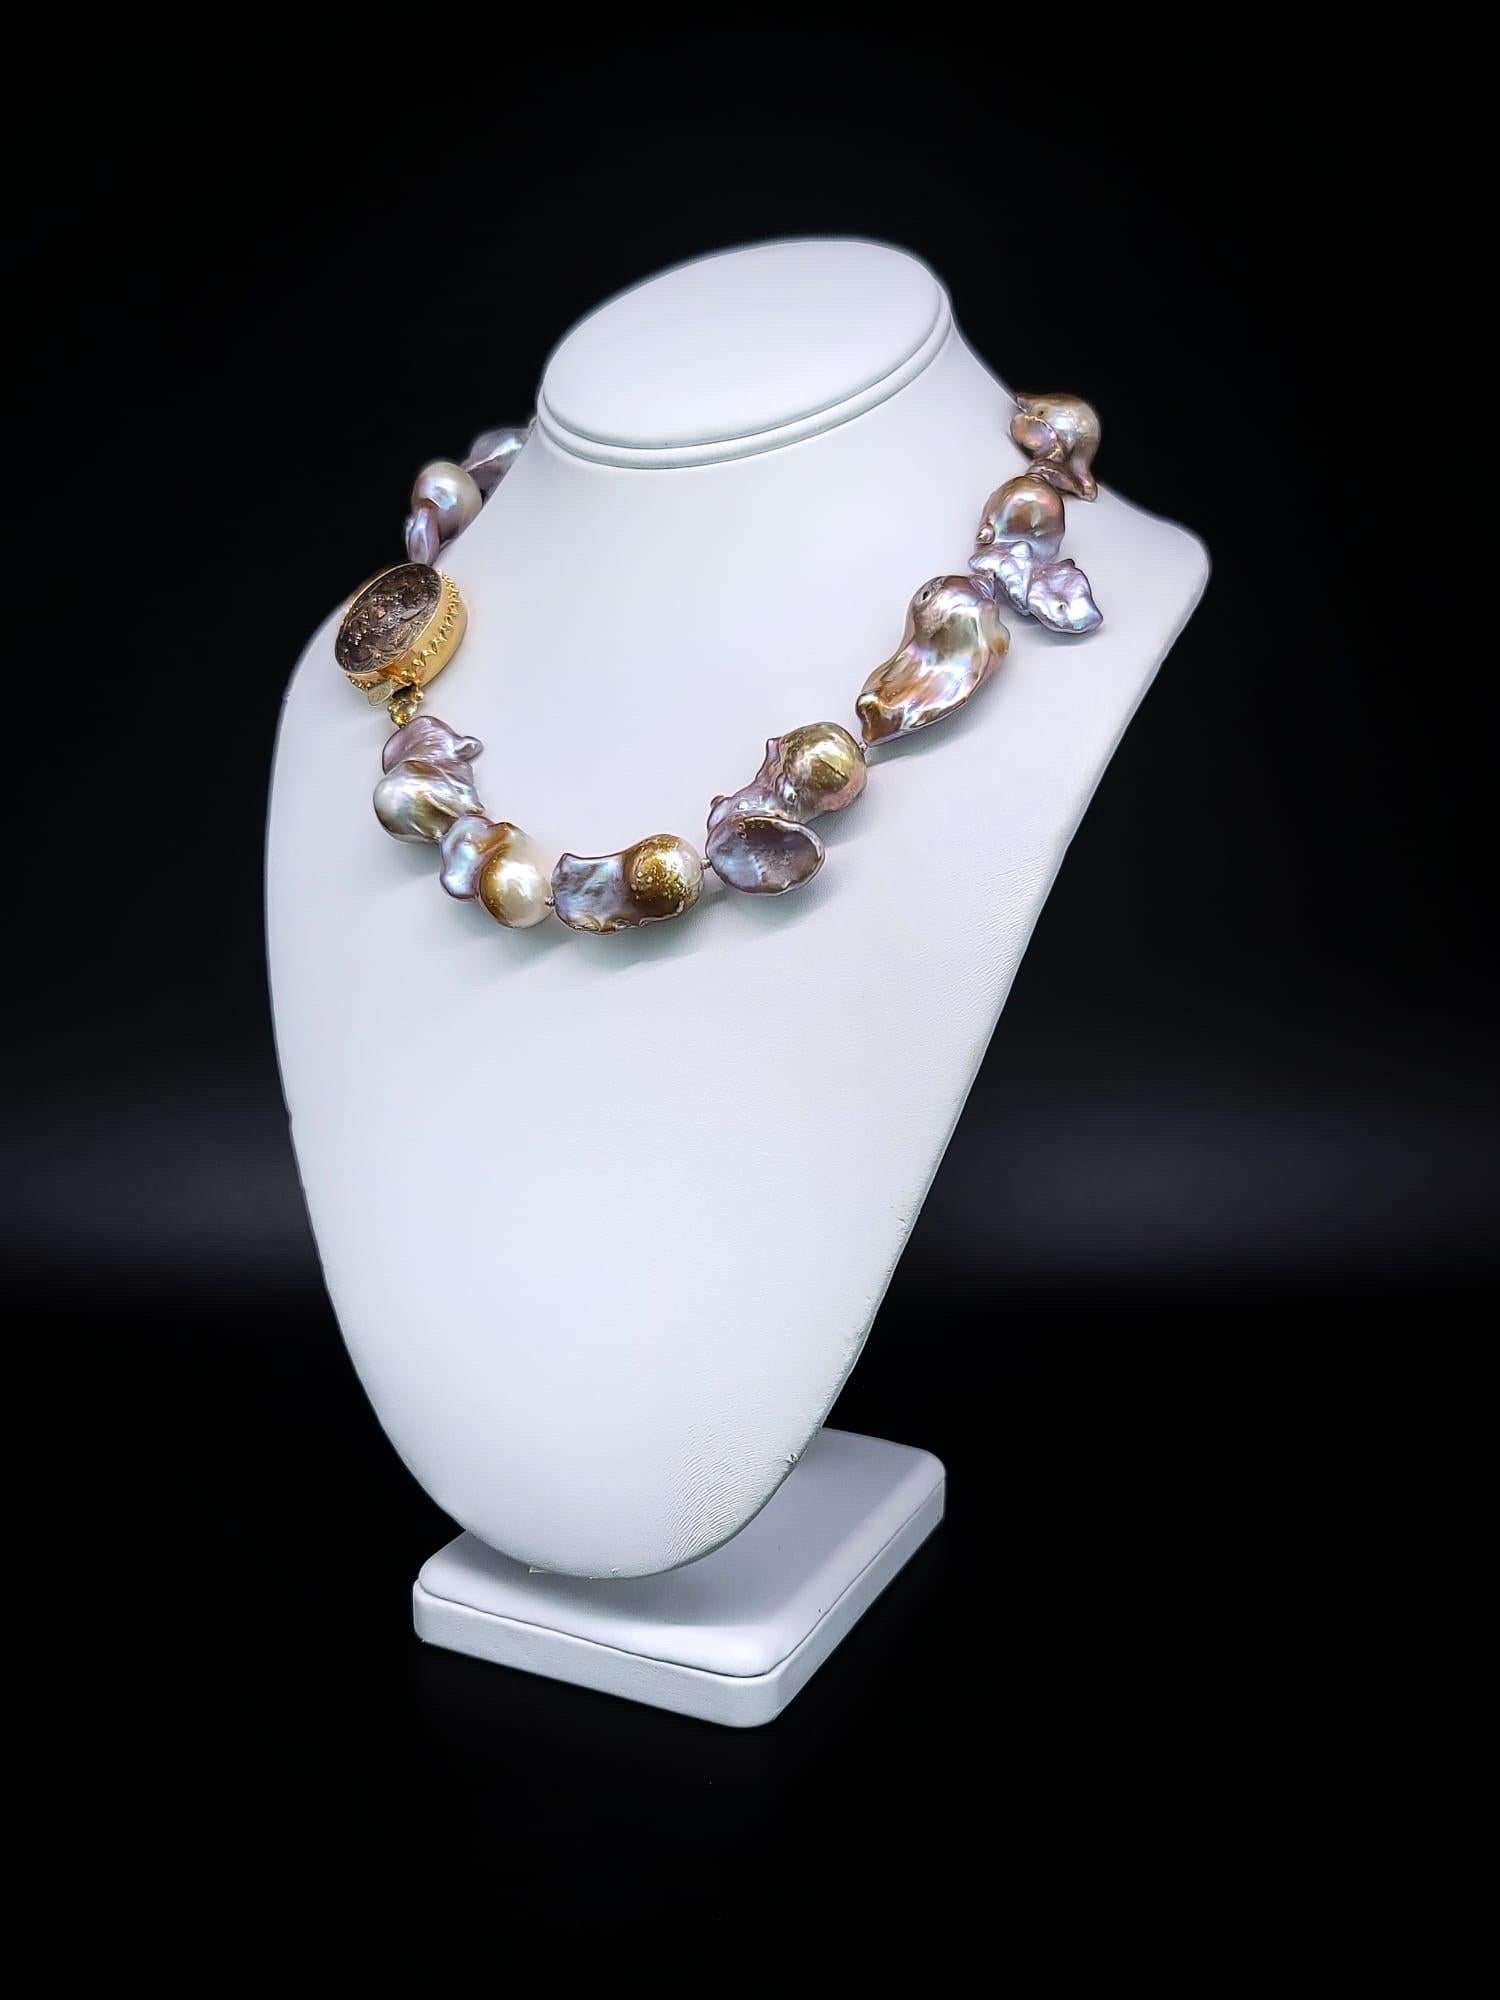 Exquisite Uniqueness. Beyond the realm of ordinary pearl strands lies a truly remarkable piece – a necklace adorned with captivating baroque pearls. These pearls exude an irresistible charm, with their alluring ombré transition from silvery tones to